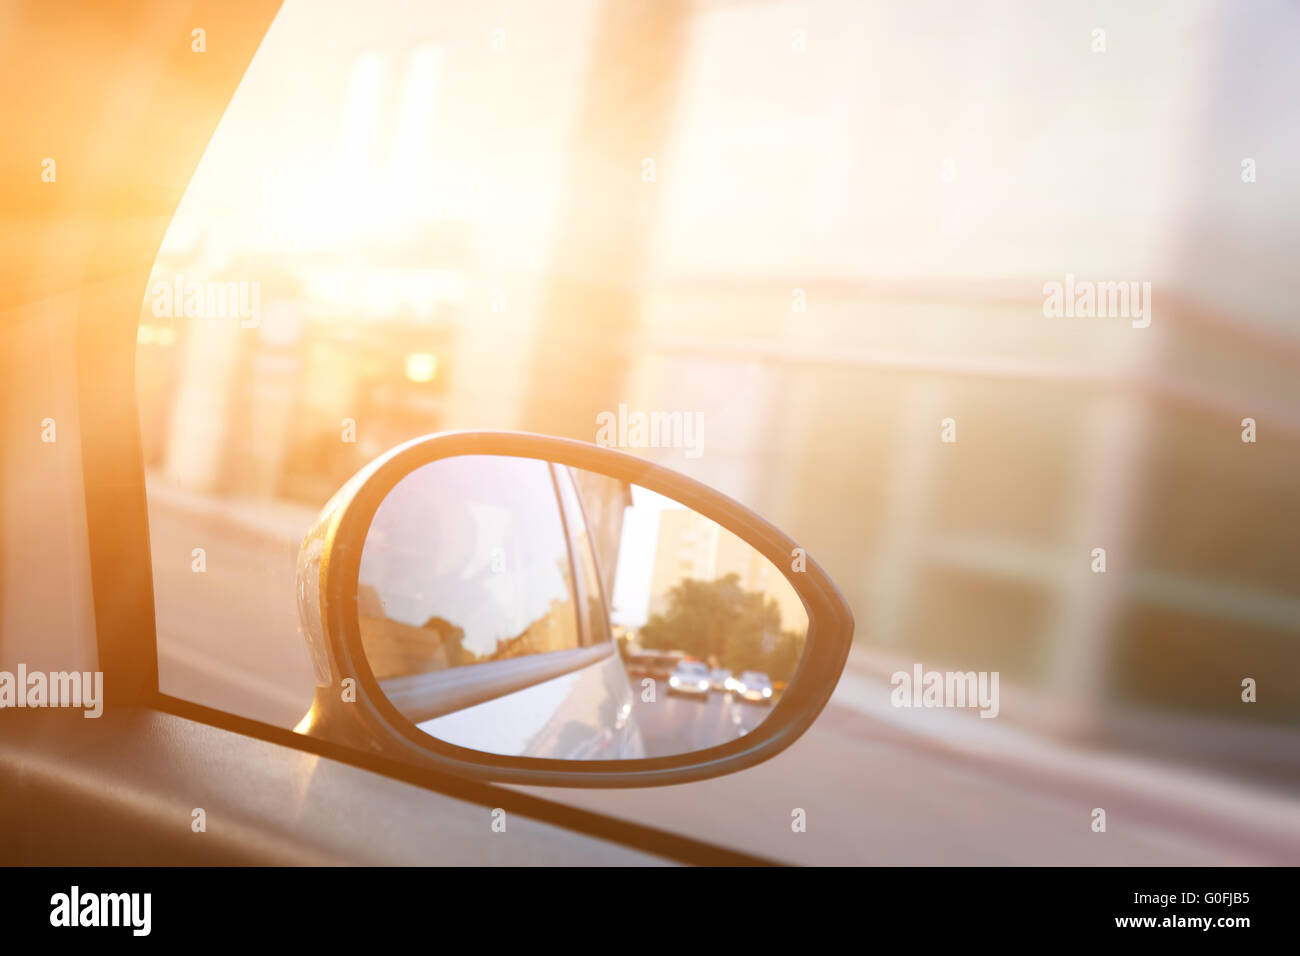 Dynamic view from car on the wing mirror during drive. Sun shining. Transportation Stock Photo